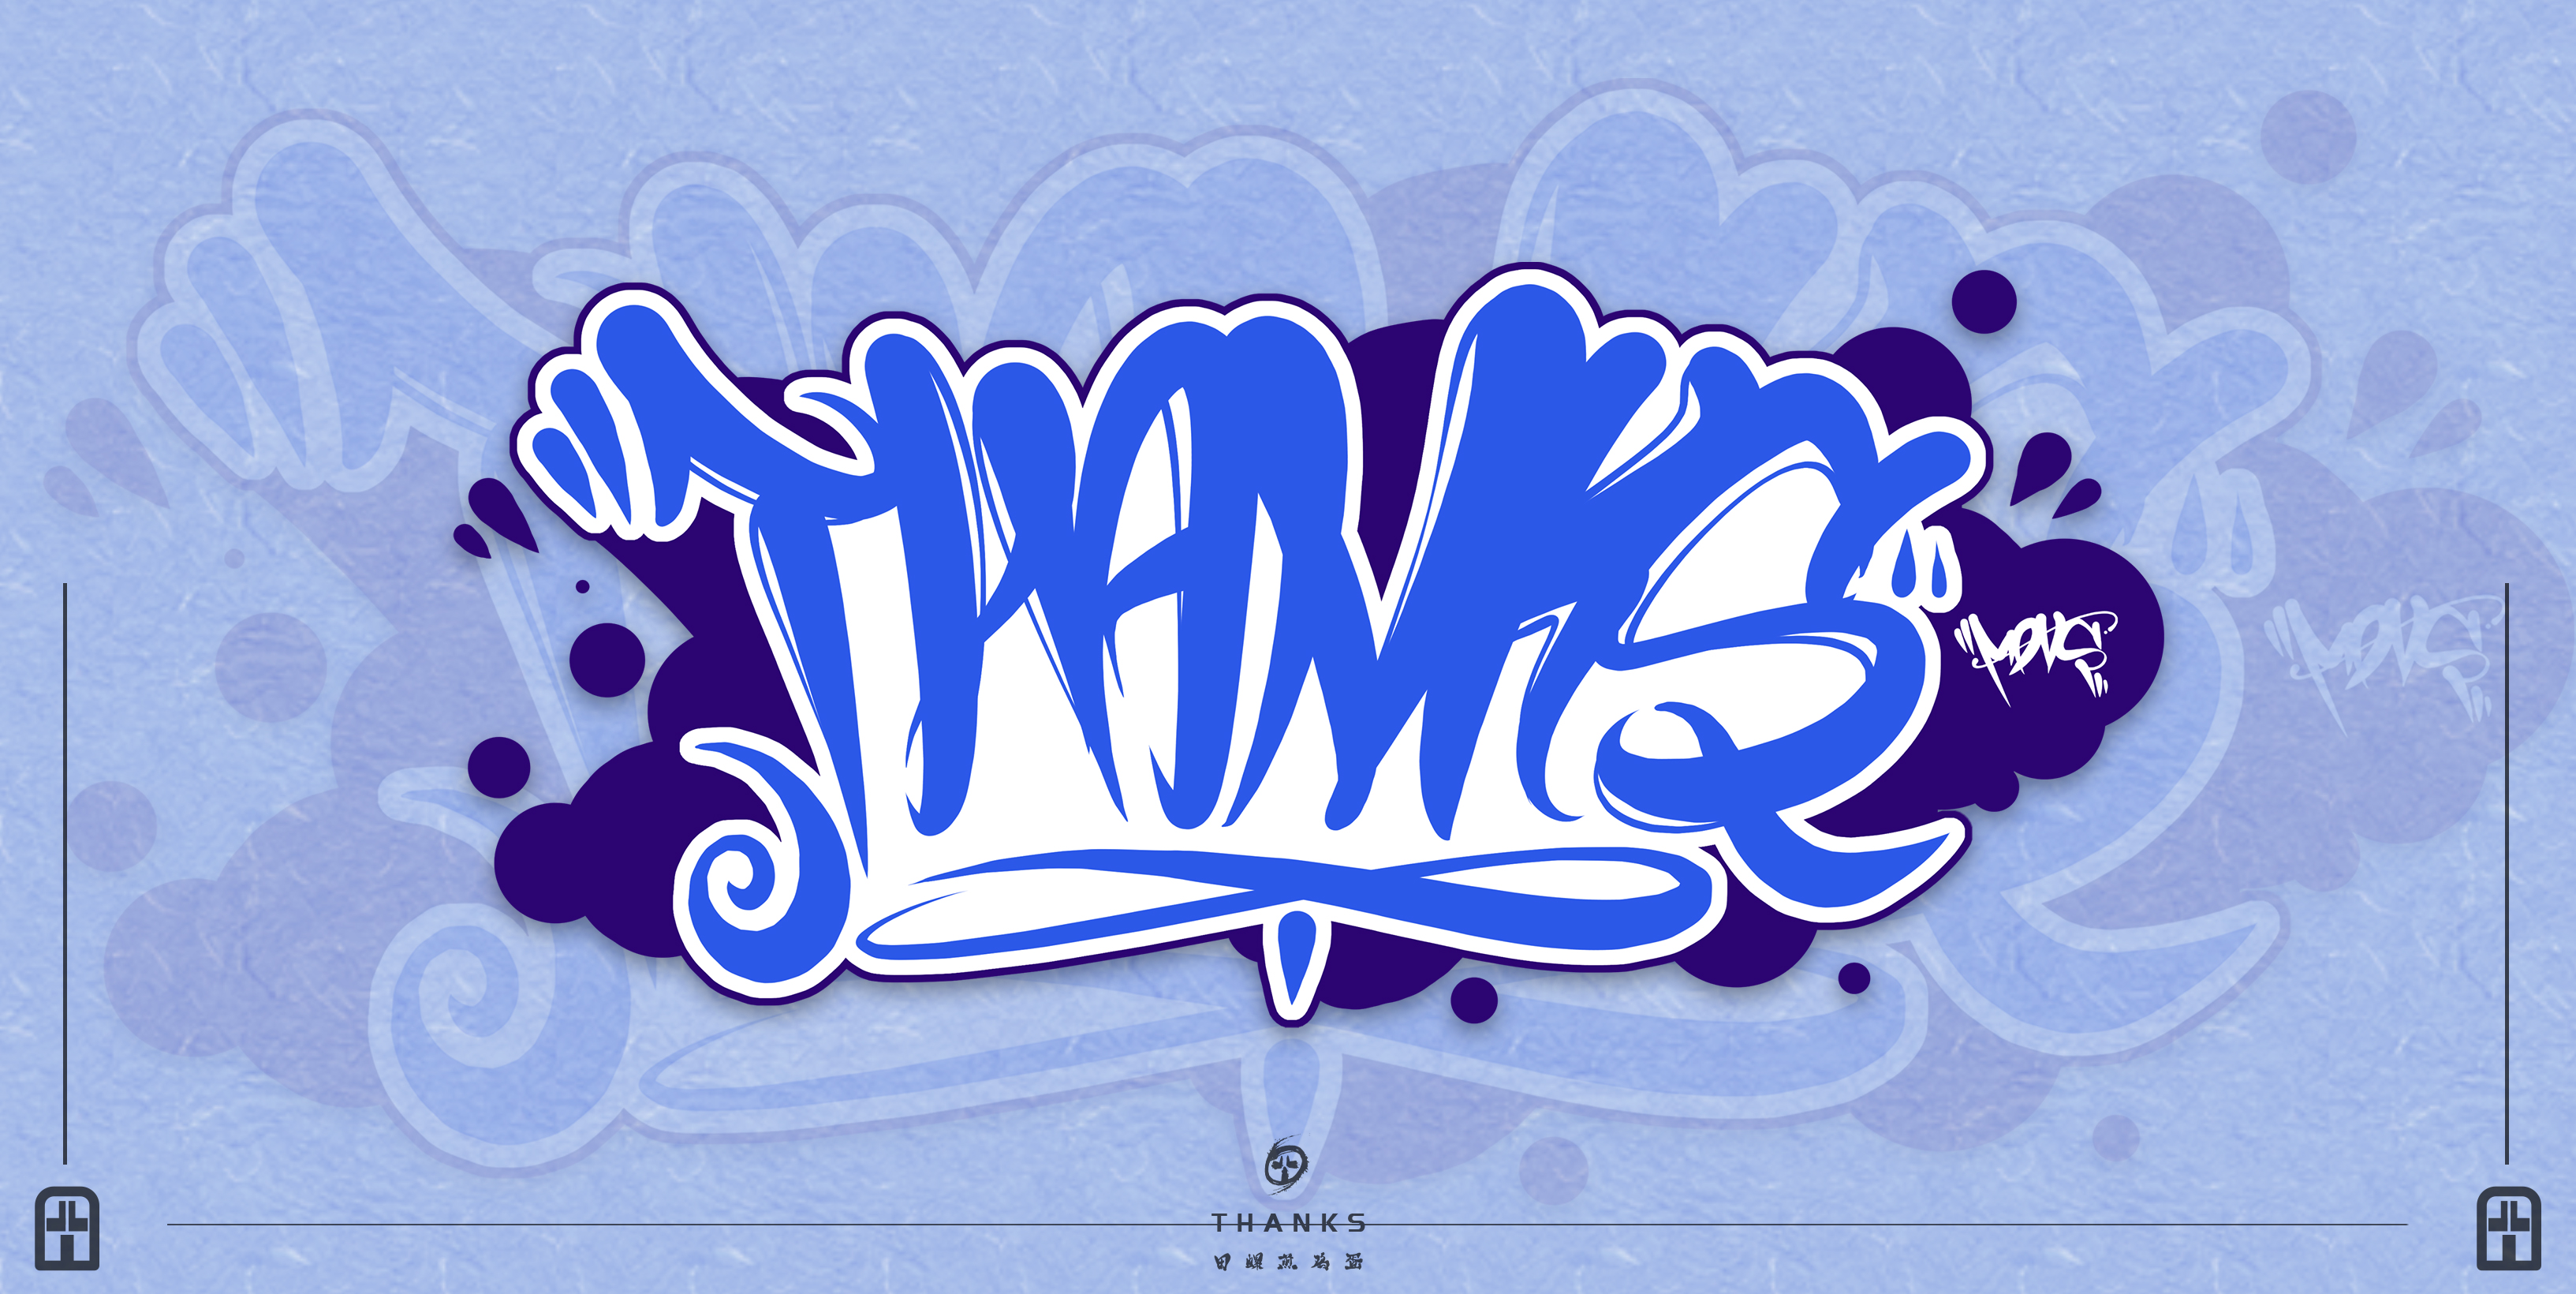 Graffiti font exploration-the names of some platforms, and the id of small partners, etc.